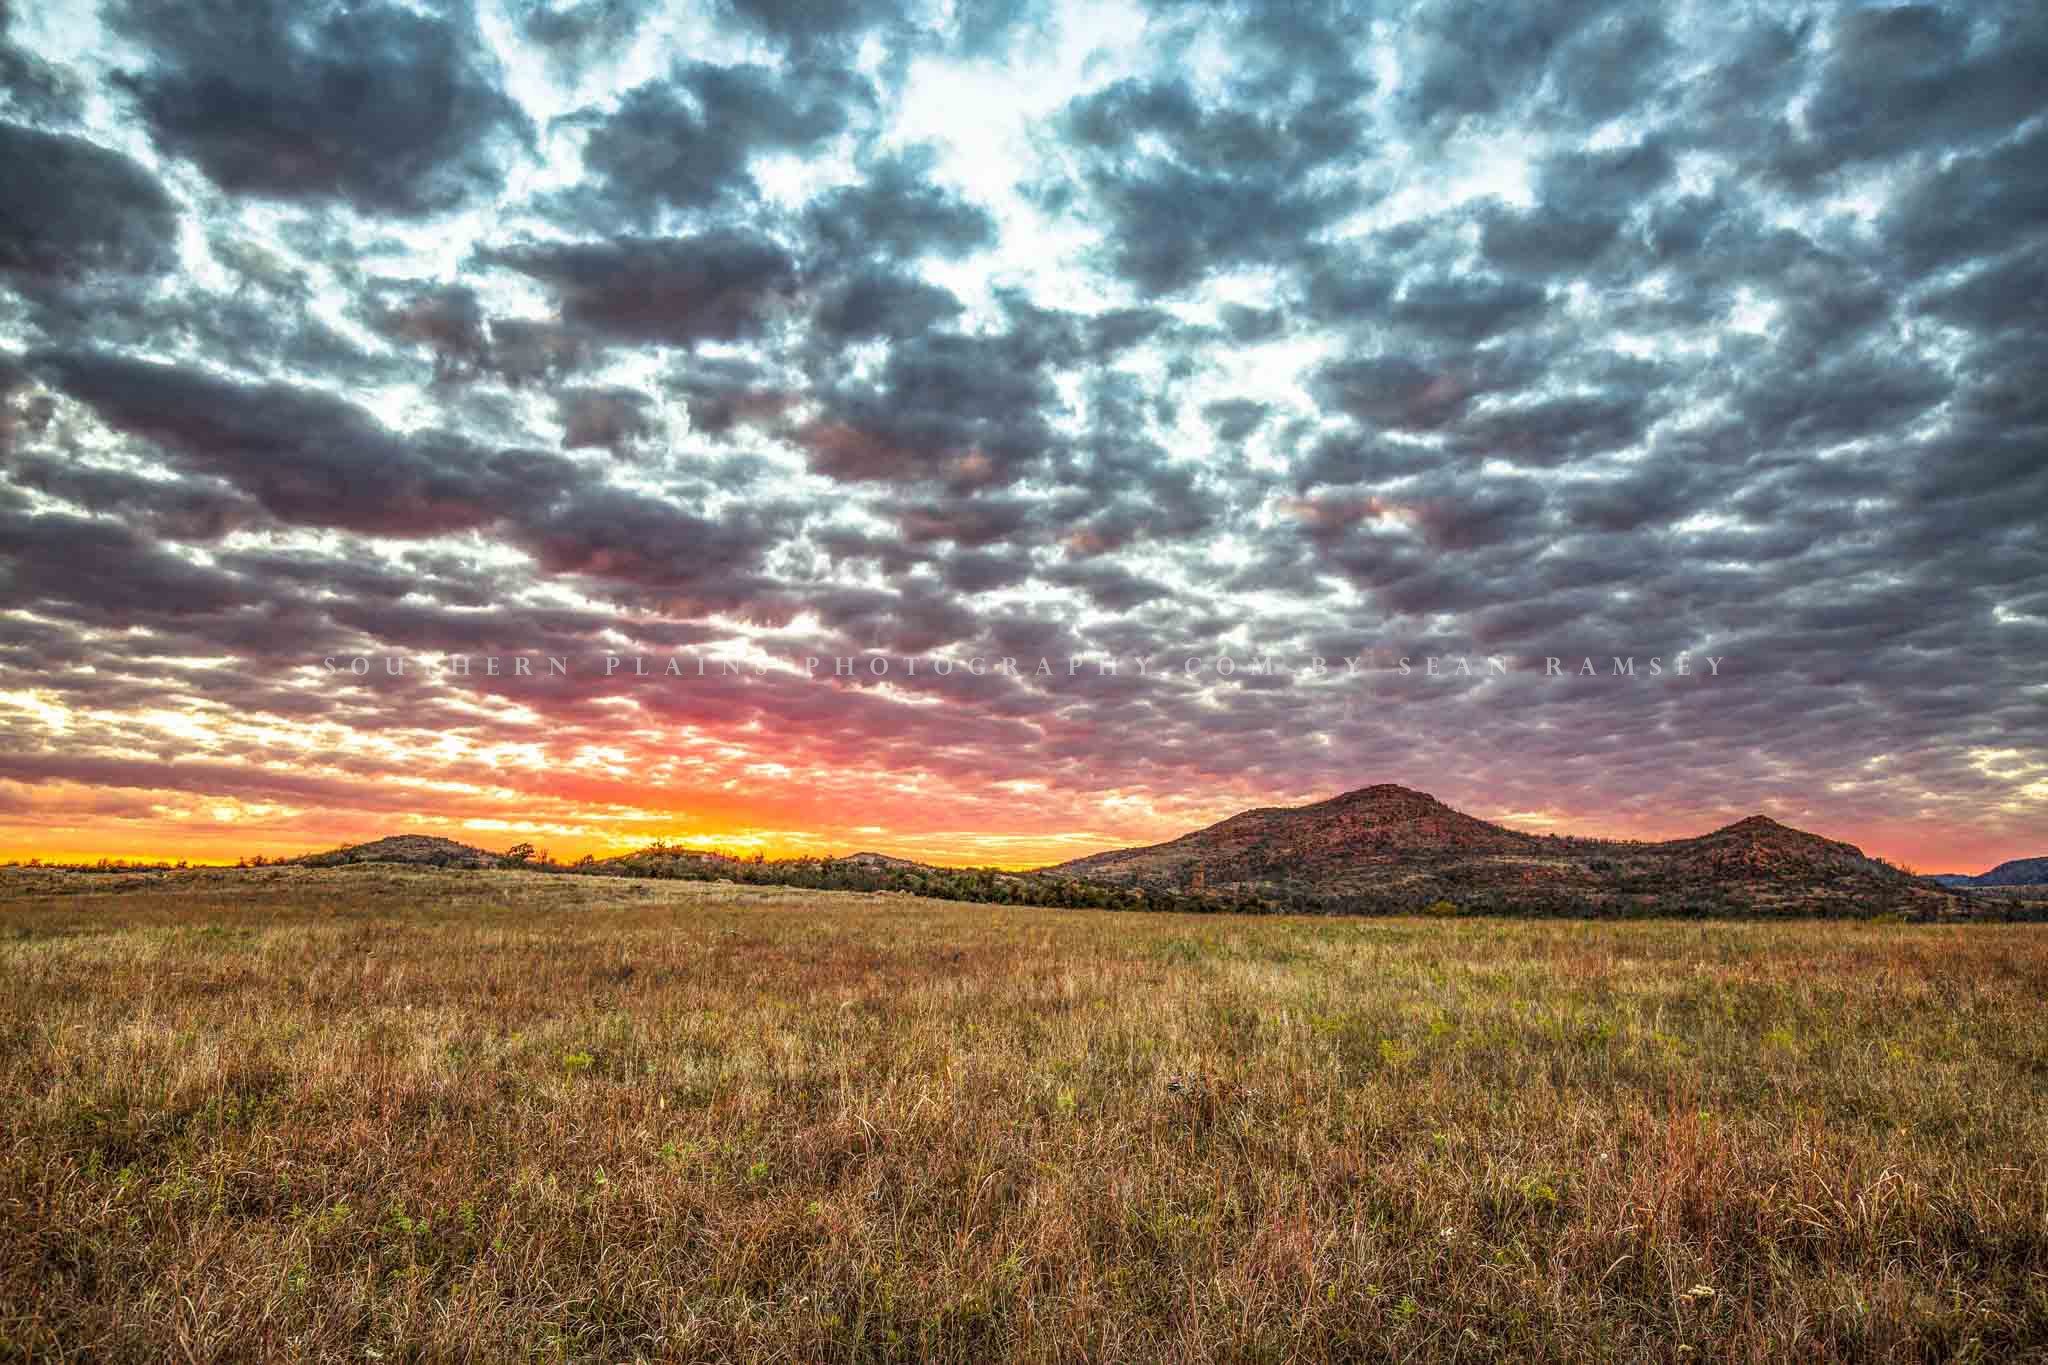 Landscape photography print of a warm sunset over the Wichita Mountains in southwest Oklahoma by Sean Ramsey of Southern Plains Photography.